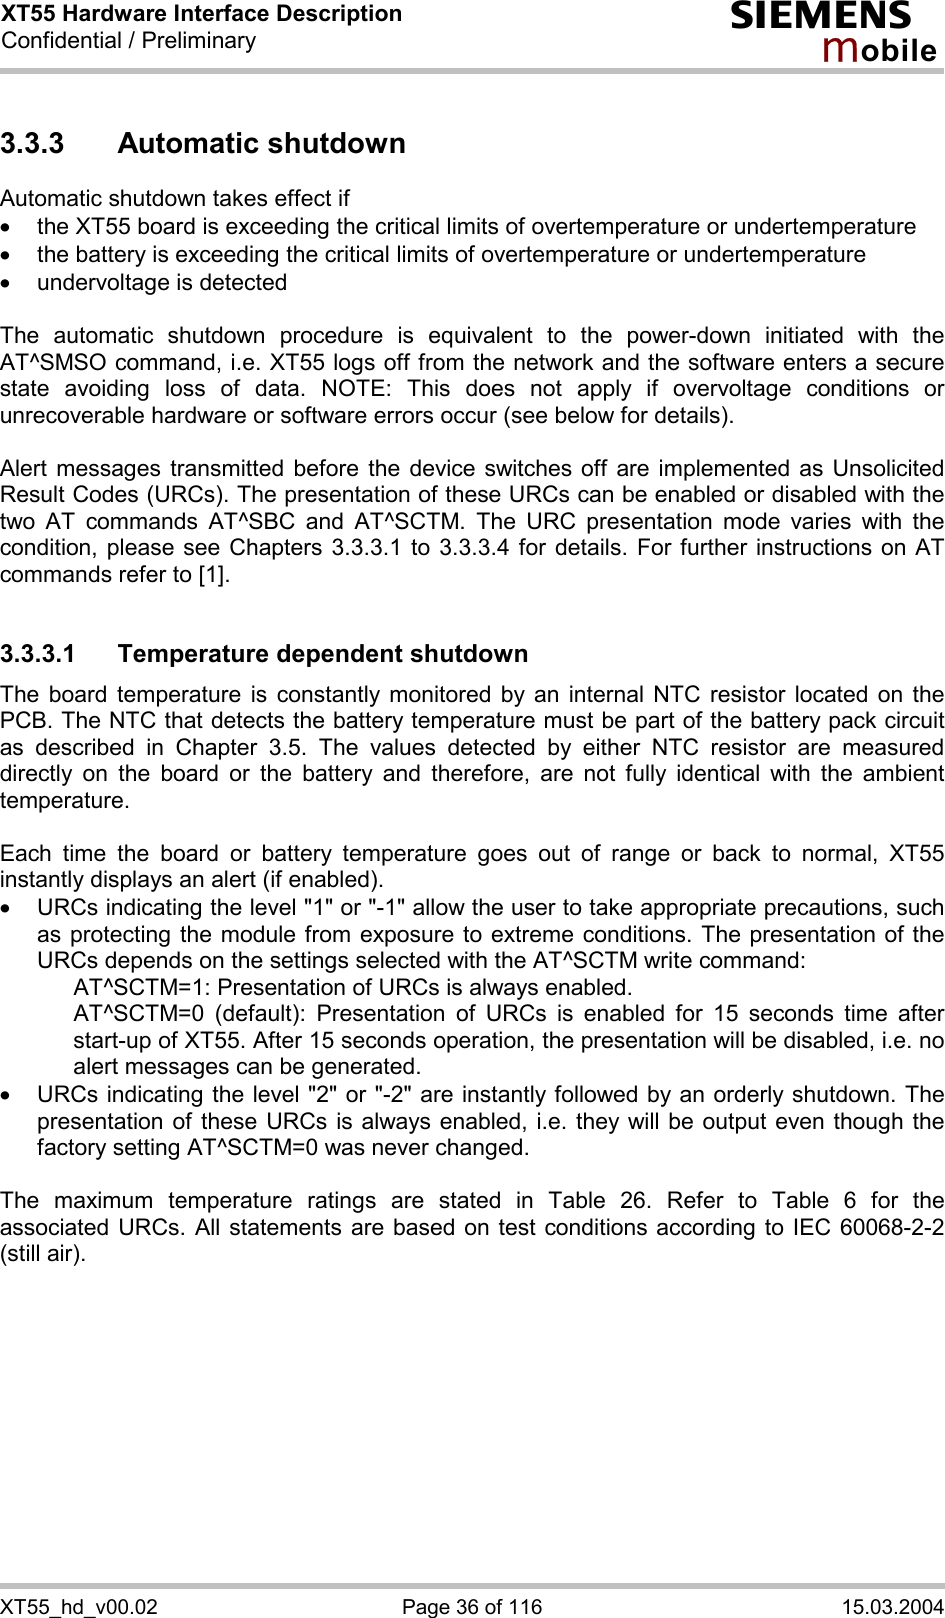 XT55 Hardware Interface Description Confidential / Preliminary s mo b i l e XT55_hd_v00.02  Page 36 of 116  15.03.2004 3.3.3 Automatic shutdown Automatic shutdown takes effect if ·  the XT55 board is exceeding the critical limits of overtemperature or undertemperature ·  the battery is exceeding the critical limits of overtemperature or undertemperature ·  undervoltage is detected  The automatic shutdown procedure is equivalent to the power-down initiated with the AT^SMSO command, i.e. XT55 logs off from the network and the software enters a secure state avoiding loss of data. NOTE: This does not apply if overvoltage conditions or unrecoverable hardware or software errors occur (see below for details).  Alert messages transmitted before the device switches off are implemented as Unsolicited Result Codes (URCs). The presentation of these URCs can be enabled or disabled with the two AT commands AT^SBC and AT^SCTM. The URC presentation mode varies with the condition, please see Chapters 3.3.3.1 to 3.3.3.4 for details. For further instructions on AT commands refer to [1].  3.3.3.1  Temperature dependent shutdown The board temperature is constantly monitored by an internal NTC resistor located on the PCB. The NTC that detects the battery temperature must be part of the battery pack circuit as described in Chapter 3.5. The values detected by either NTC resistor are measured directly on the board or the battery and therefore, are not fully identical with the ambient temperature.   Each time the board or battery temperature goes out of range or back to normal, XT55 instantly displays an alert (if enabled). ·  URCs indicating the level &quot;1&quot; or &quot;-1&quot; allow the user to take appropriate precautions, such as protecting the module from exposure to extreme conditions. The presentation of the URCs depends on the settings selected with the AT^SCTM write command:     AT^SCTM=1: Presentation of URCs is always enabled.      AT^SCTM=0 (default): Presentation of URCs is enabled for 15 seconds time after start-up of XT55. After 15 seconds operation, the presentation will be disabled, i.e. no alert messages can be generated.  ·  URCs indicating the level &quot;2&quot; or &quot;-2&quot; are instantly followed by an orderly shutdown. The presentation of these URCs is always enabled, i.e. they will be output even though the factory setting AT^SCTM=0 was never changed.  The maximum temperature ratings are stated in Table 26. Refer to Table 6 for the associated URCs. All statements are based on test conditions according to IEC 60068-2-2 (still air).  